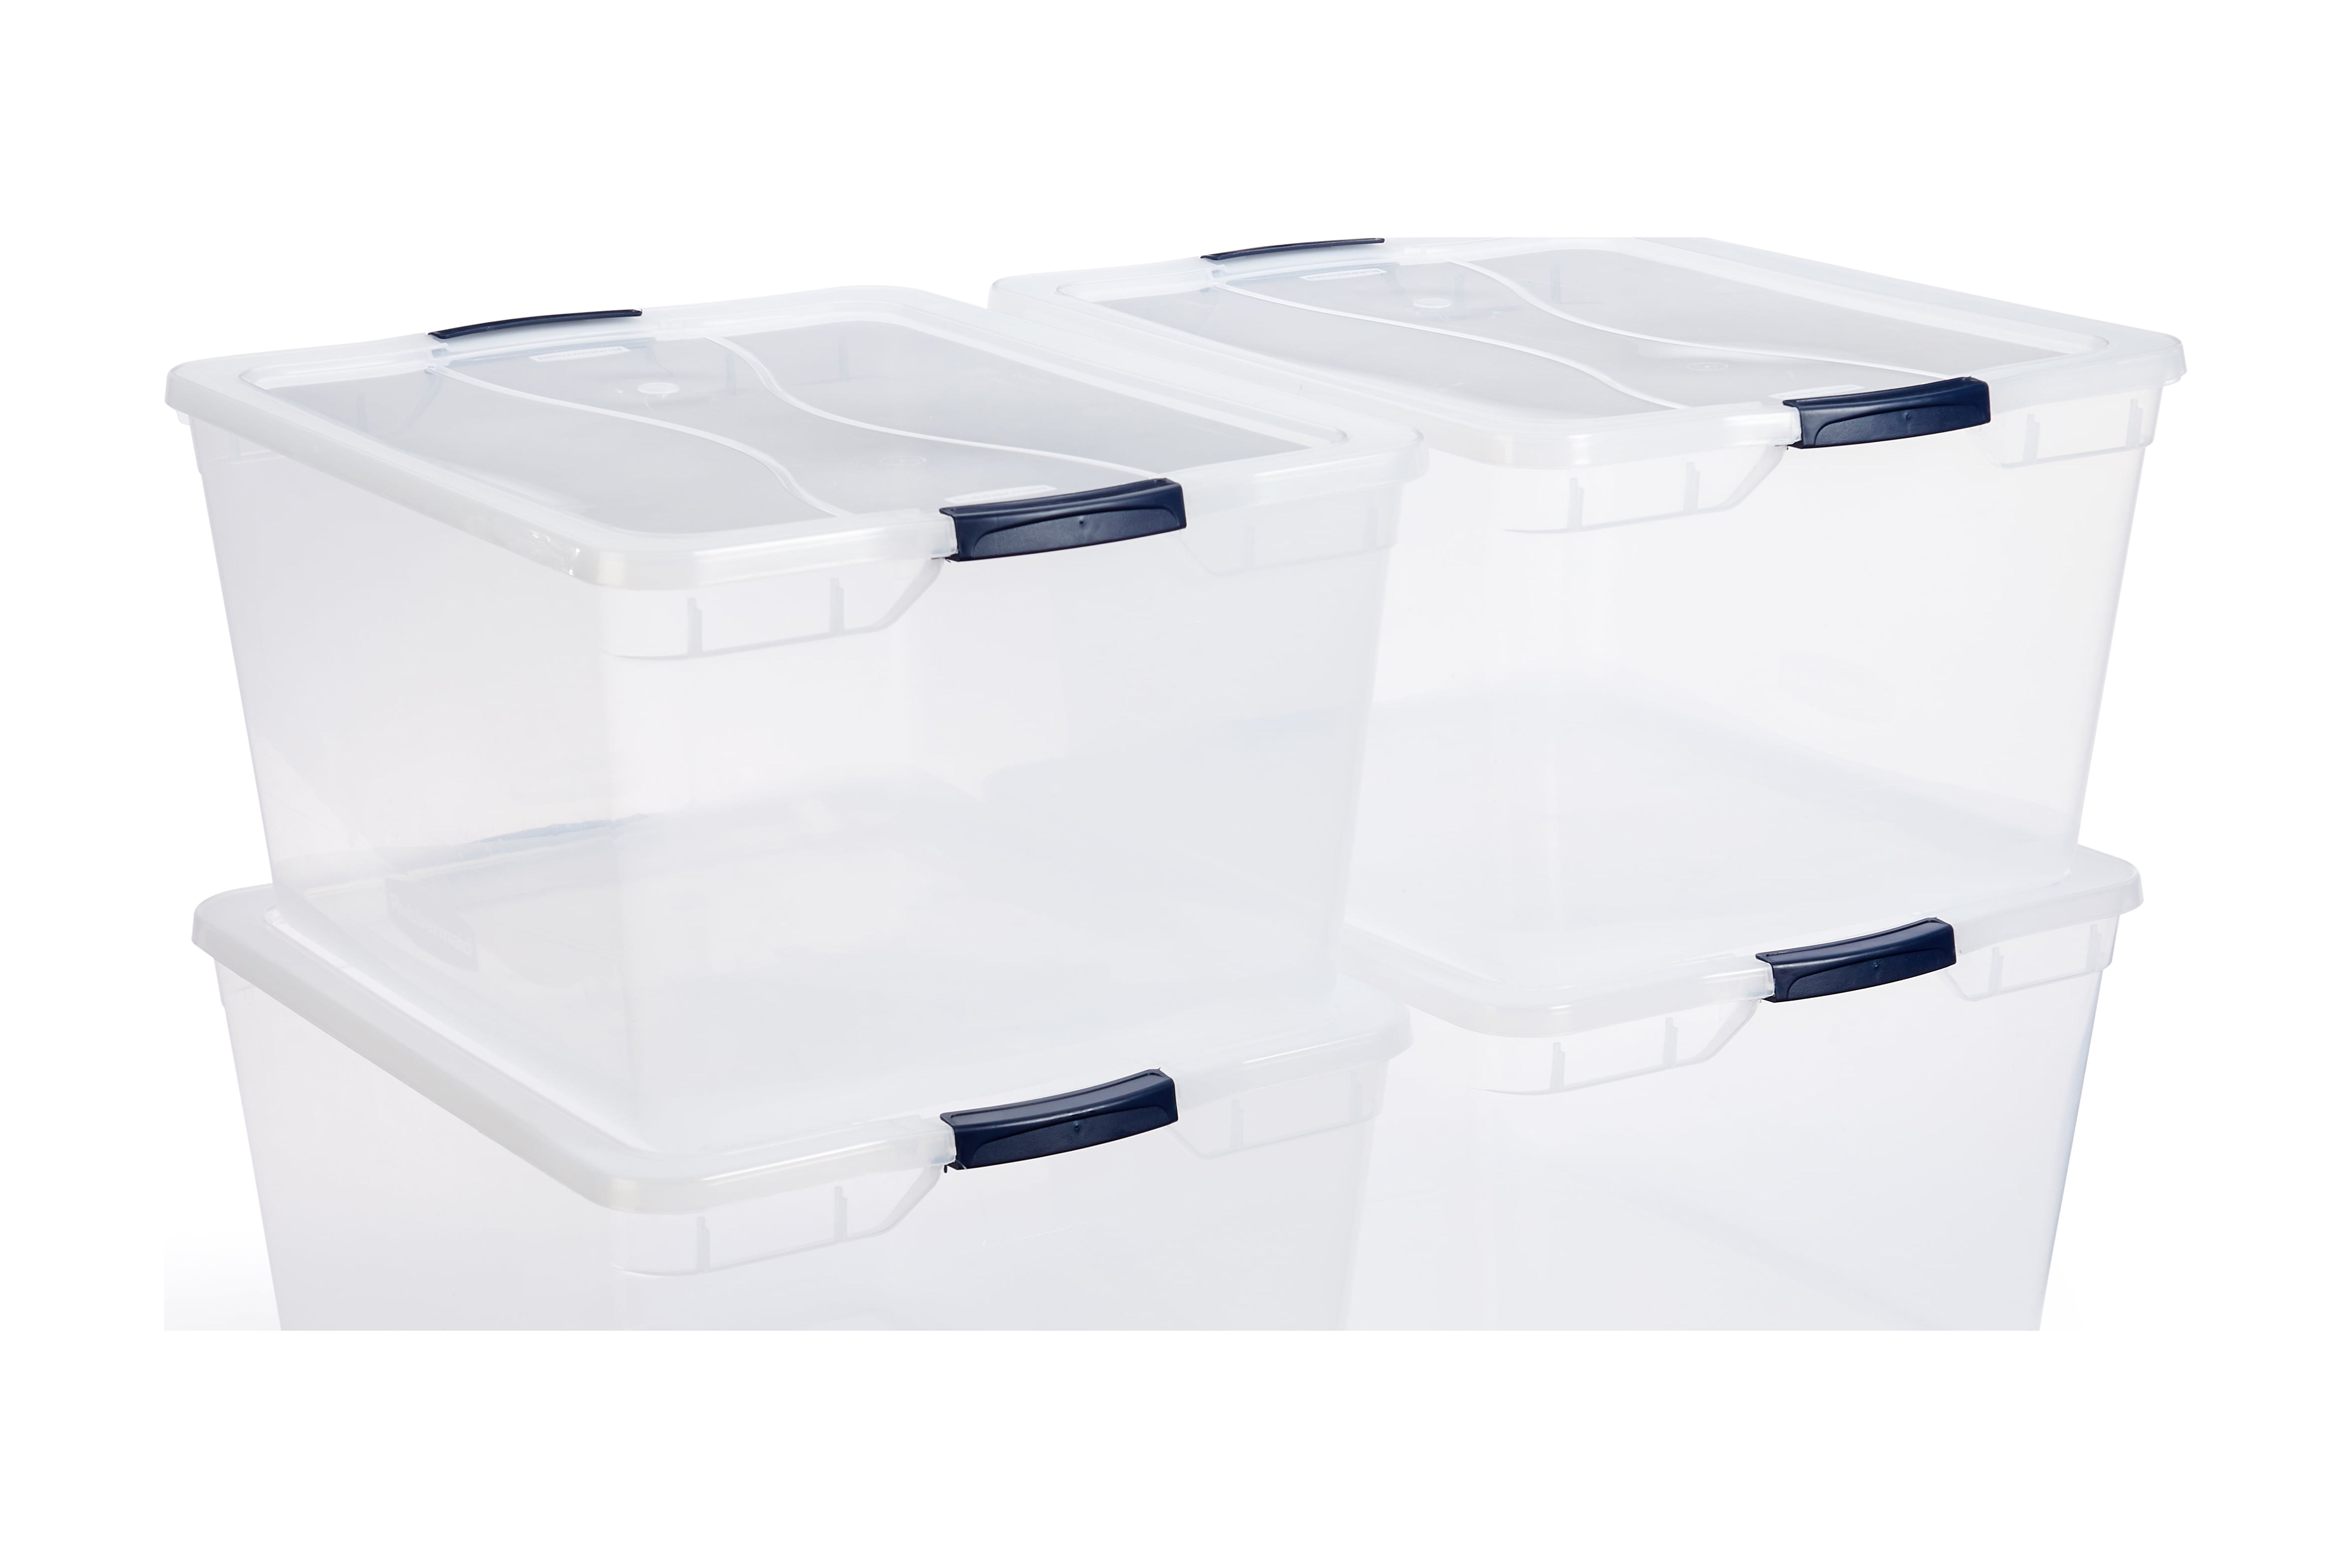 Rubbermaid Cleverstore Clear 71 Qt Plastic Storage Tote w/ Lid, 4 Pack - image 1 of 7